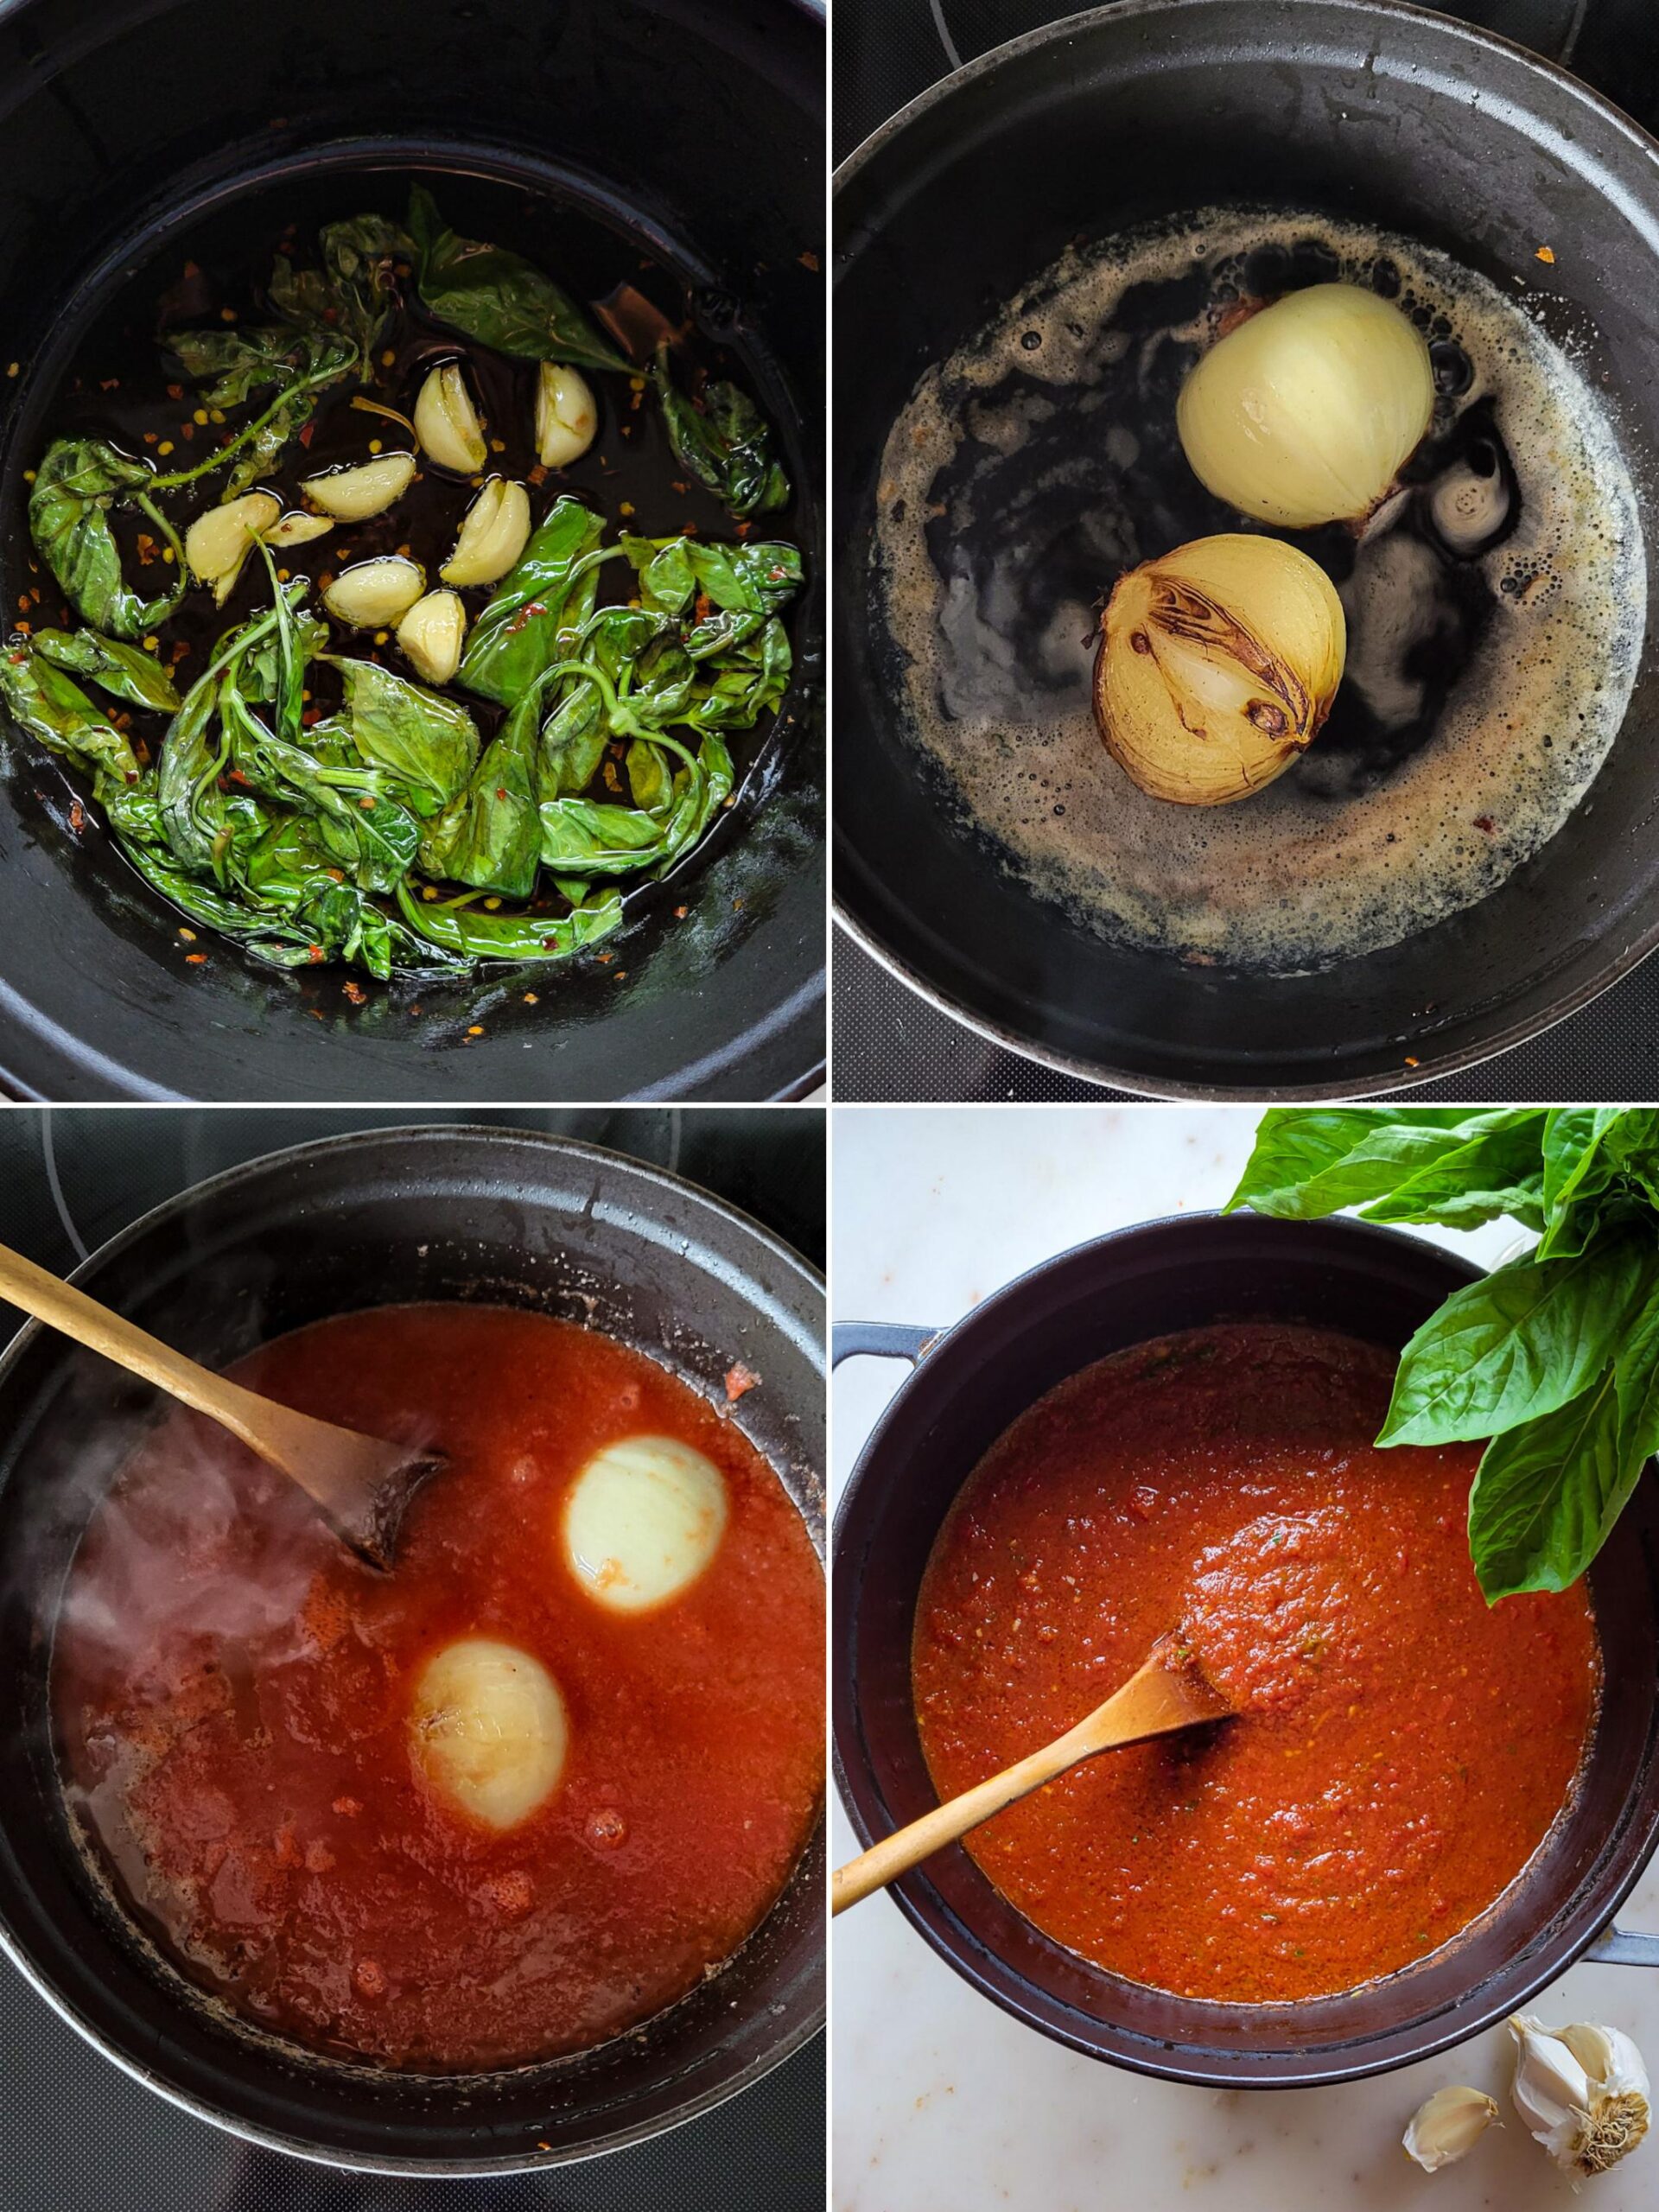 Collage showing the infusing of the oil with basil and garlic, and the making of the tomato sauce.